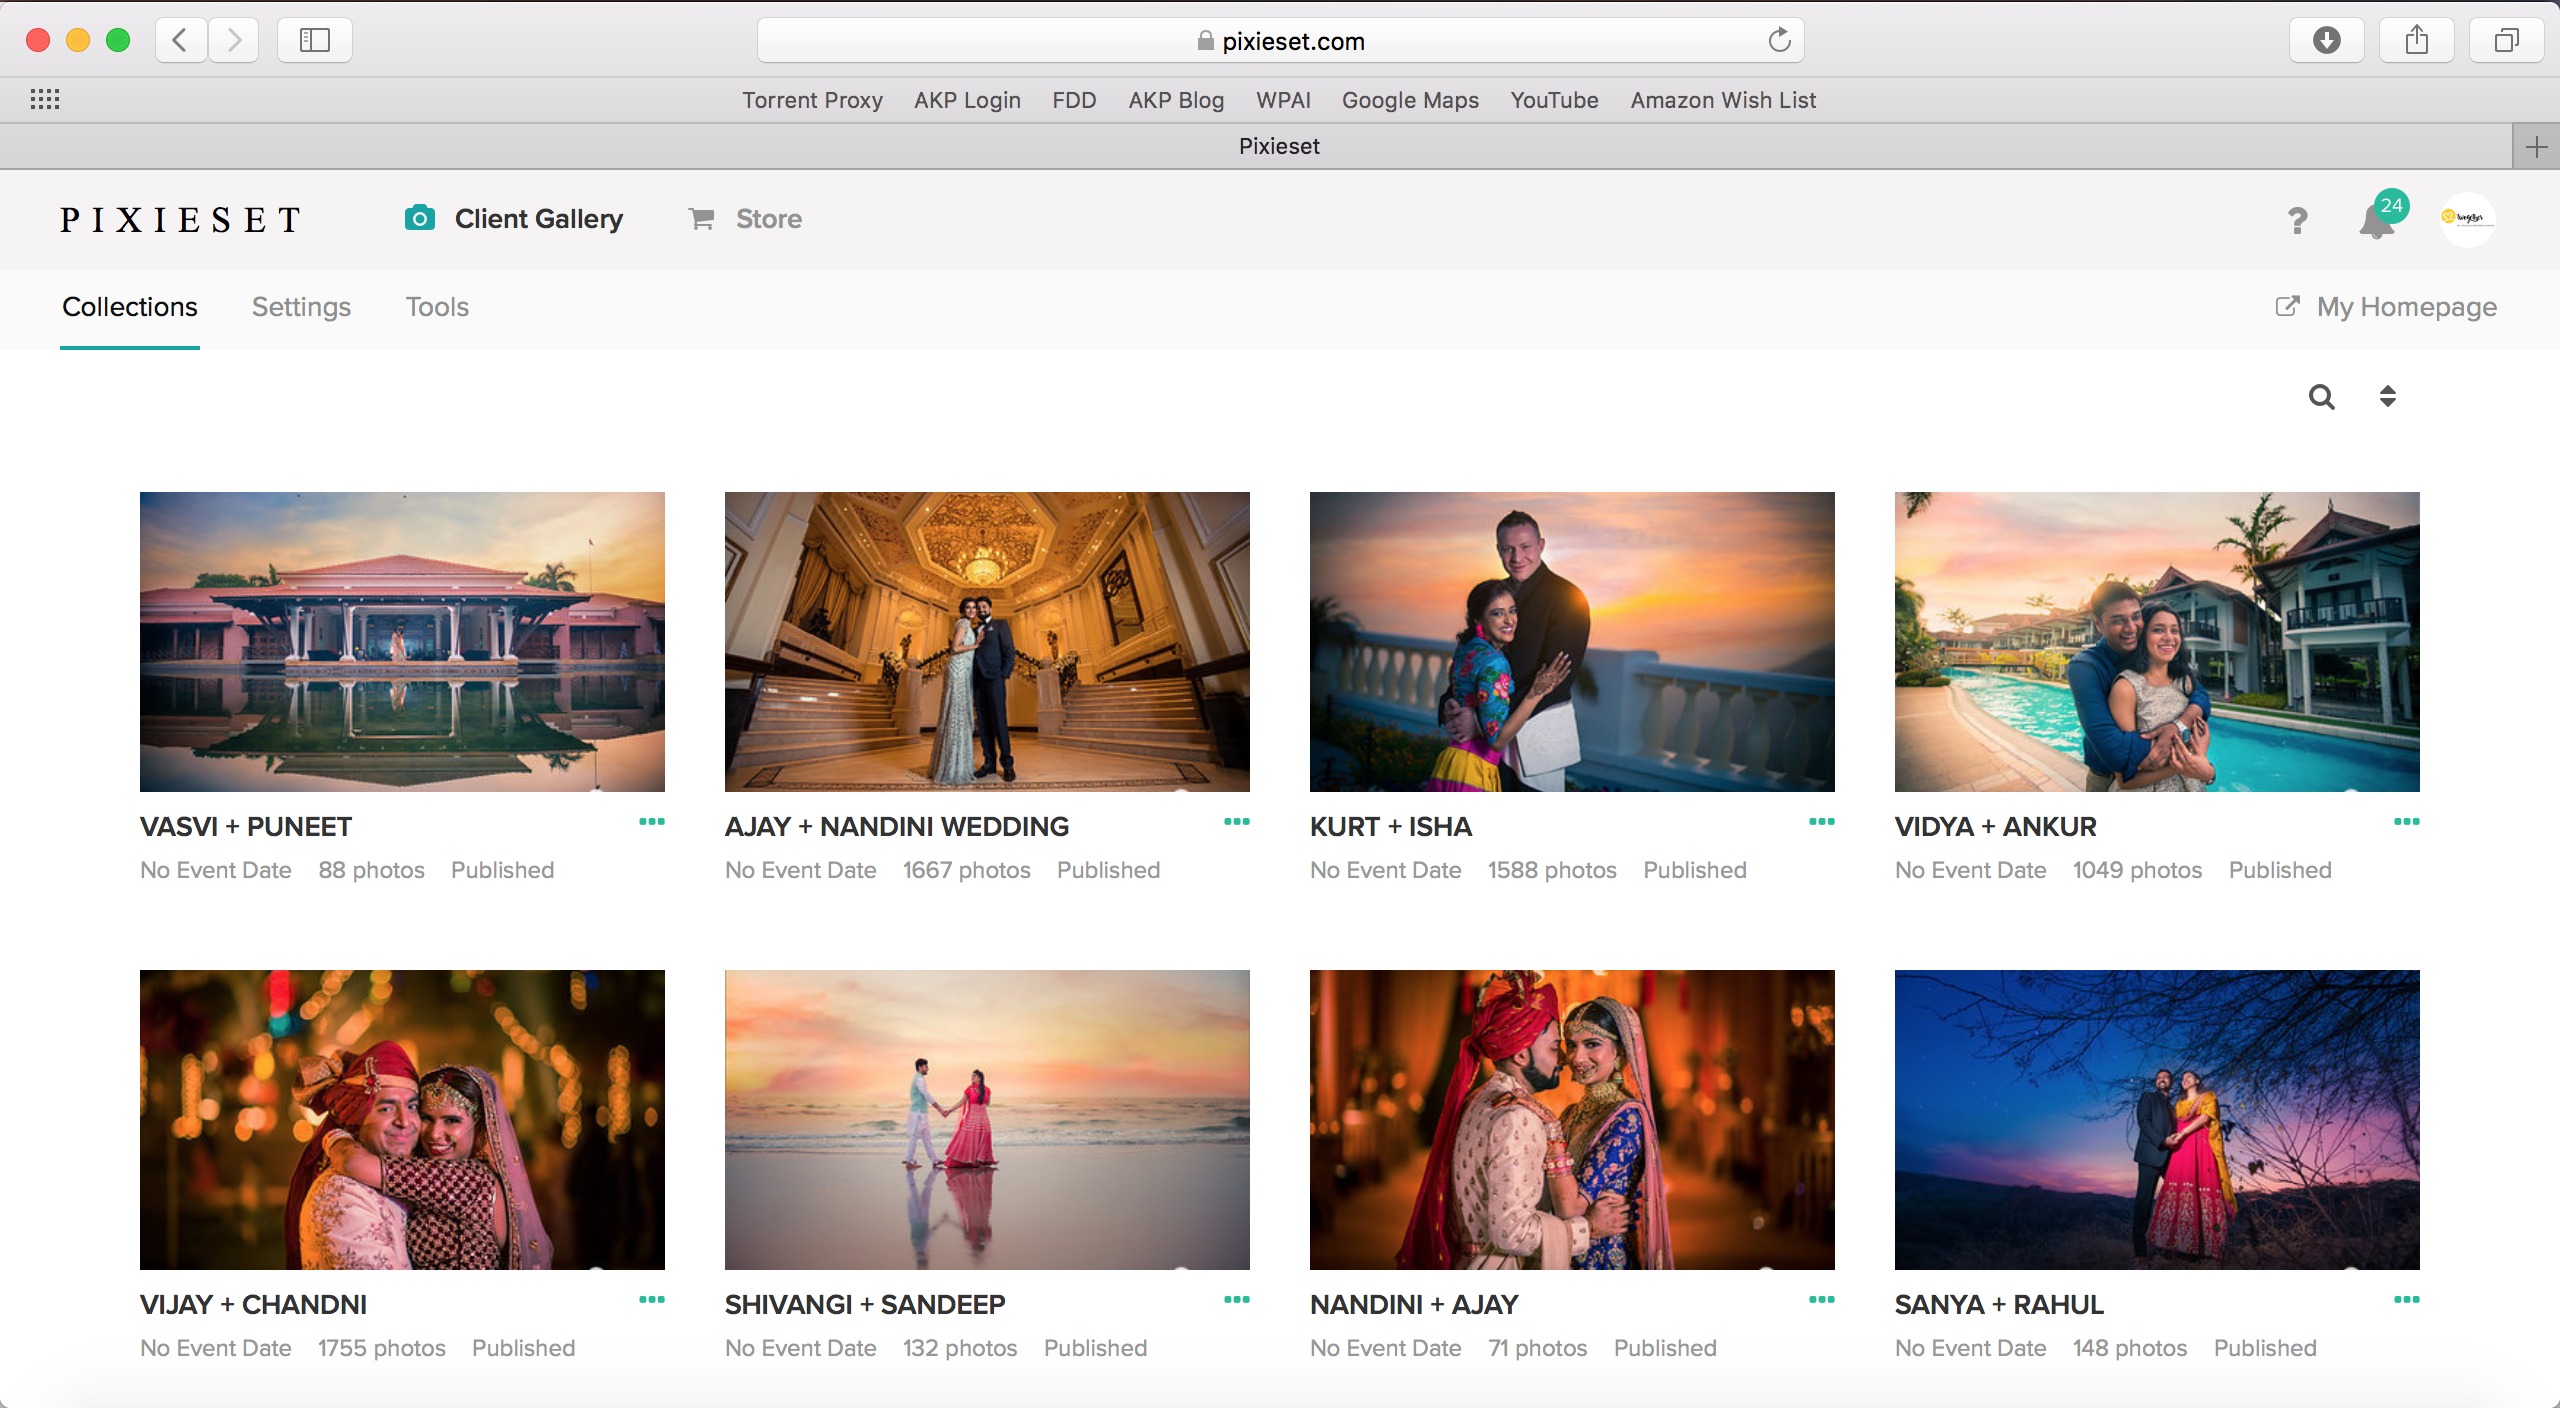 A screenshot of our Pixieset image gallery.